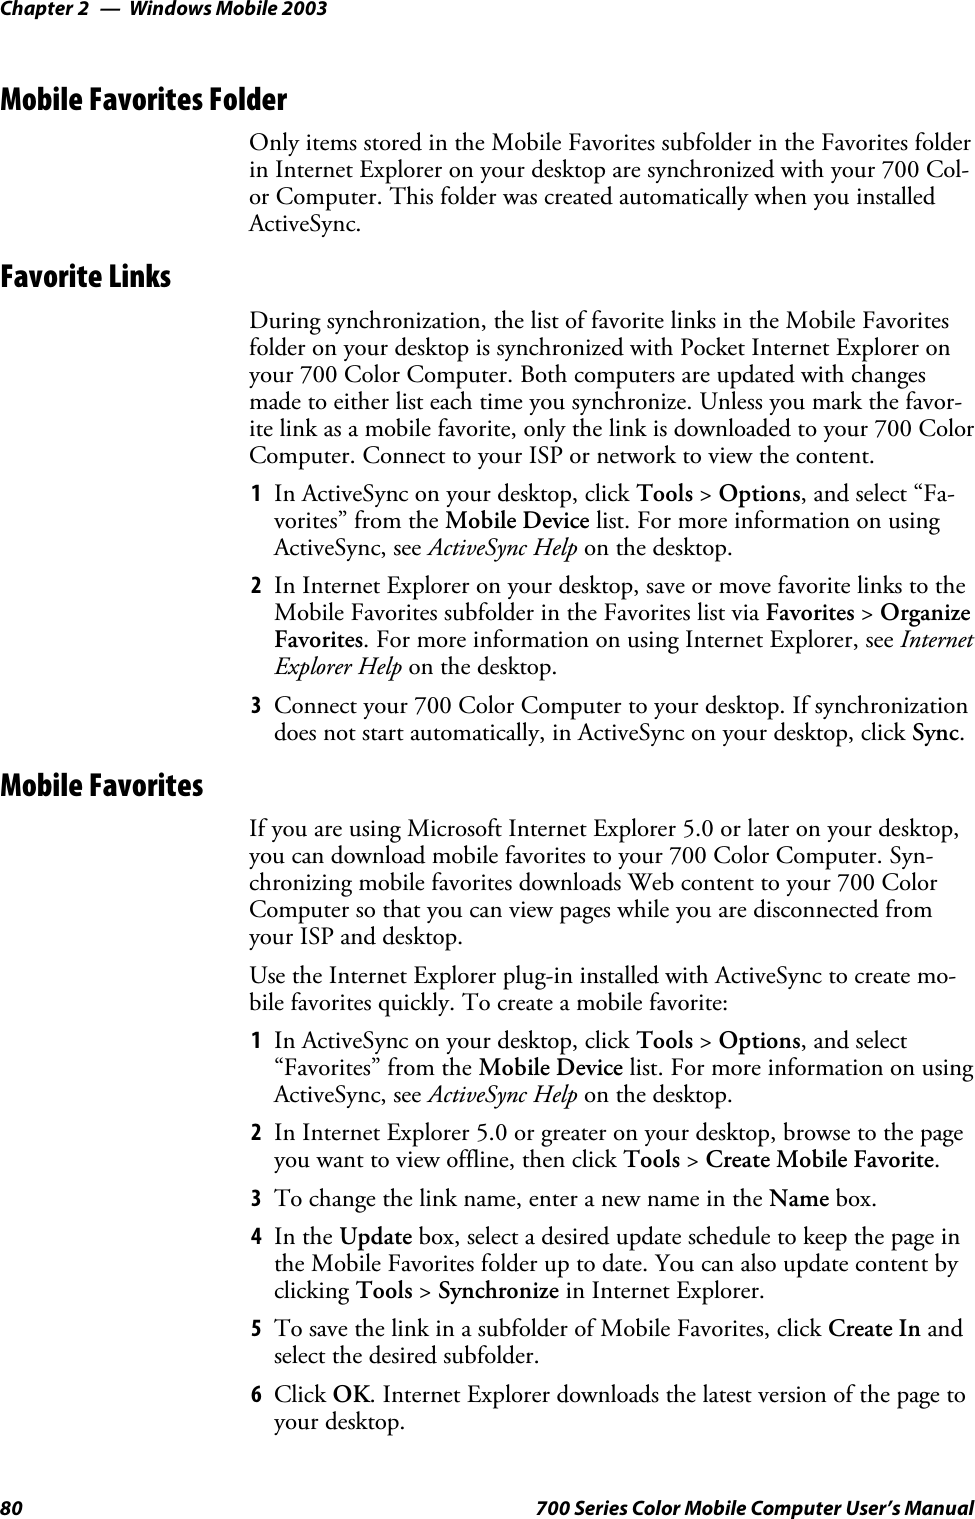 Windows Mobile 2003Chapter —280 700 Series Color Mobile Computer User’s ManualMobile Favorites FolderOnly items stored in the Mobile Favorites subfolder in the Favorites folderin Internet Explorer on your desktop are synchronized with your 700 Col-or Computer. This folder was created automatically when you installedActiveSync.Favorite LinksDuring synchronization, the list of favorite links in the Mobile Favoritesfolder on your desktop is synchronized with Pocket Internet Explorer onyour 700 Color Computer. Both computers are updated with changesmade to either list each time you synchronize. Unless you mark the favor-ite link as a mobile favorite, only the link is downloaded to your 700 ColorComputer. Connect to your ISP or network to view the content.1In ActiveSync on your desktop, click Tools &gt;Options, and select “Fa-vorites” from the Mobile Device list. For more information on usingActiveSync, see ActiveSync Help on the desktop.2In Internet Explorer on your desktop, save or move favorite links to theMobile Favorites subfolder in the Favorites list via Favorites &gt;OrganizeFavorites. For more information on using Internet Explorer, see InternetExplorer Help on the desktop.3Connect your 700 Color Computer to your desktop. If synchronizationdoes not start automatically, in ActiveSync on your desktop, click Sync.Mobile FavoritesIf you are using Microsoft Internet Explorer 5.0 or later on your desktop,you can download mobile favorites to your 700 Color Computer. Syn-chronizing mobile favorites downloads Web content to your 700 ColorComputer so that you can view pages while you are disconnected fromyour ISP and desktop.Use the Internet Explorer plug-in installed with ActiveSync to create mo-bile favorites quickly. To create a mobile favorite:1In ActiveSync on your desktop, click Tools &gt;Options,andselect“Favorites” from the Mobile Device list. For more information on usingActiveSync, see ActiveSync Help on the desktop.2In Internet Explorer 5.0 or greater on your desktop, browse to the pageyou want to view offline, then click Tools &gt;Create Mobile Favorite.3To change the link name, enter a new name in the Name box.4In the Update box, select a desired update schedule to keep the page inthe Mobile Favorites folder up to date. You can also update content byclicking Tools &gt;Synchronize in Internet Explorer.5To save the link in a subfolder of Mobile Favorites, click Create In andselect the desired subfolder.6Click OK. Internet Explorer downloads the latest version of the page toyour desktop.